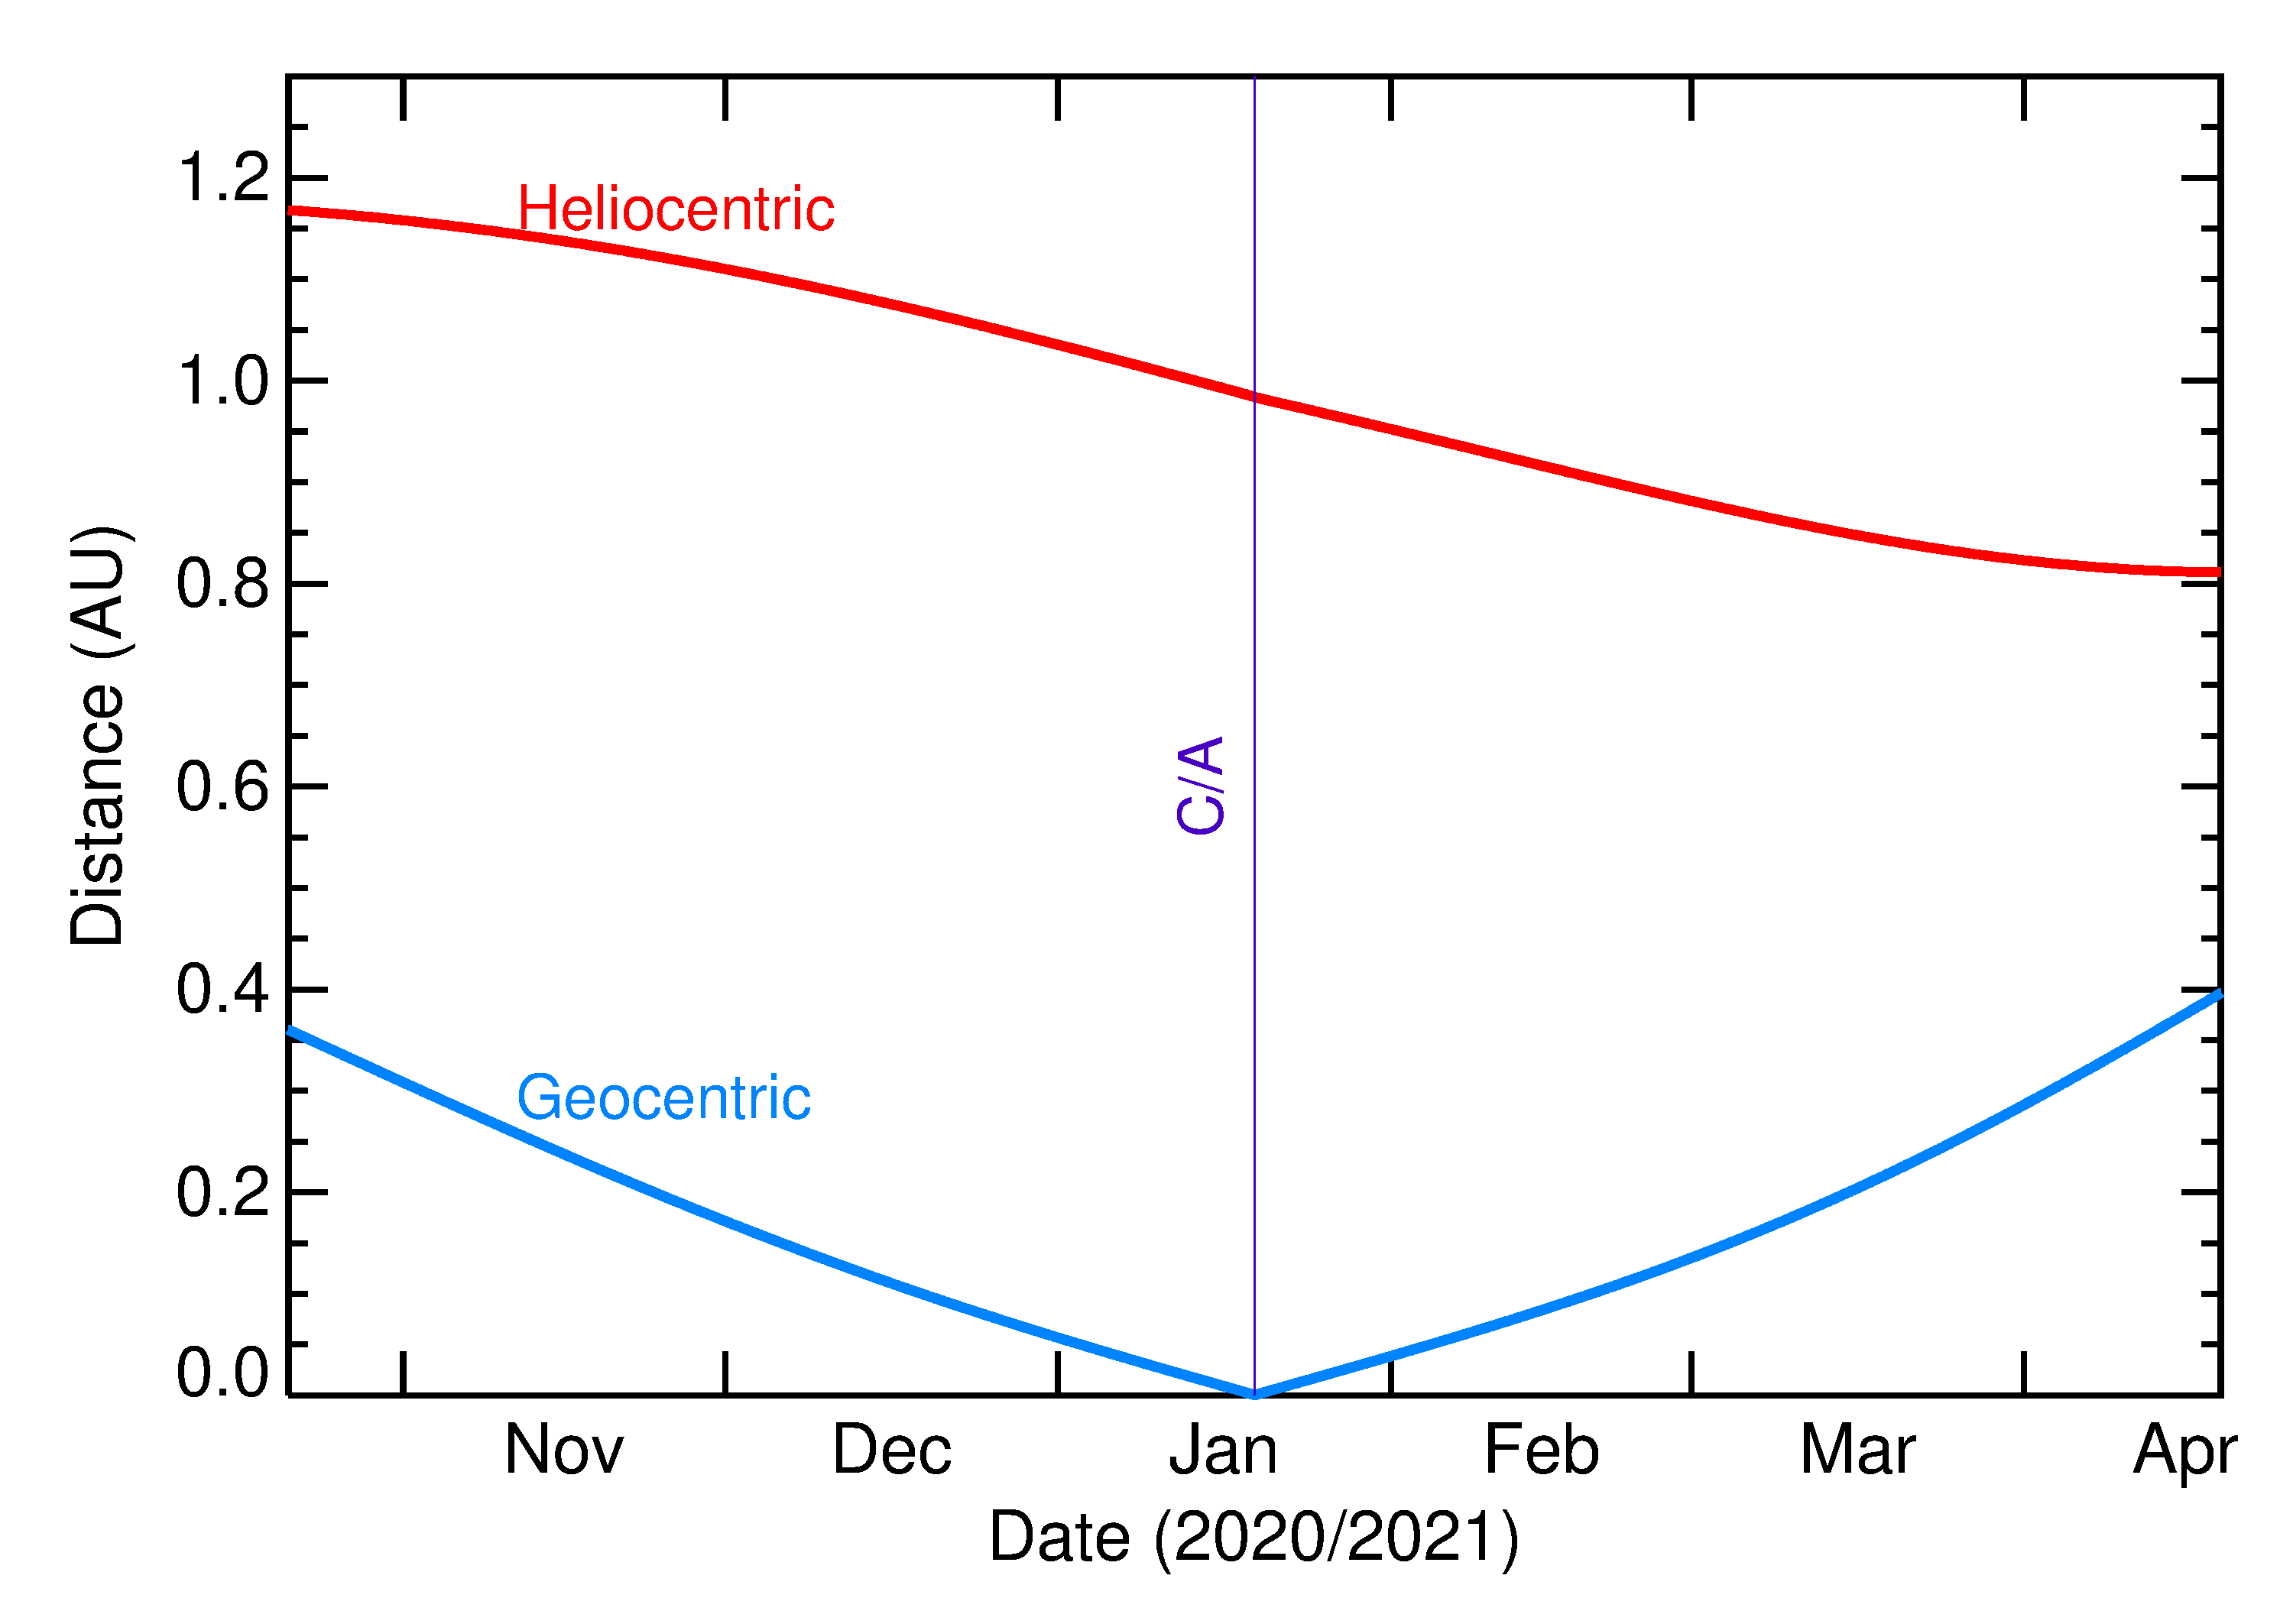 Heliocentric and Geocentric Distances of 2021 BO in the months around closest approach